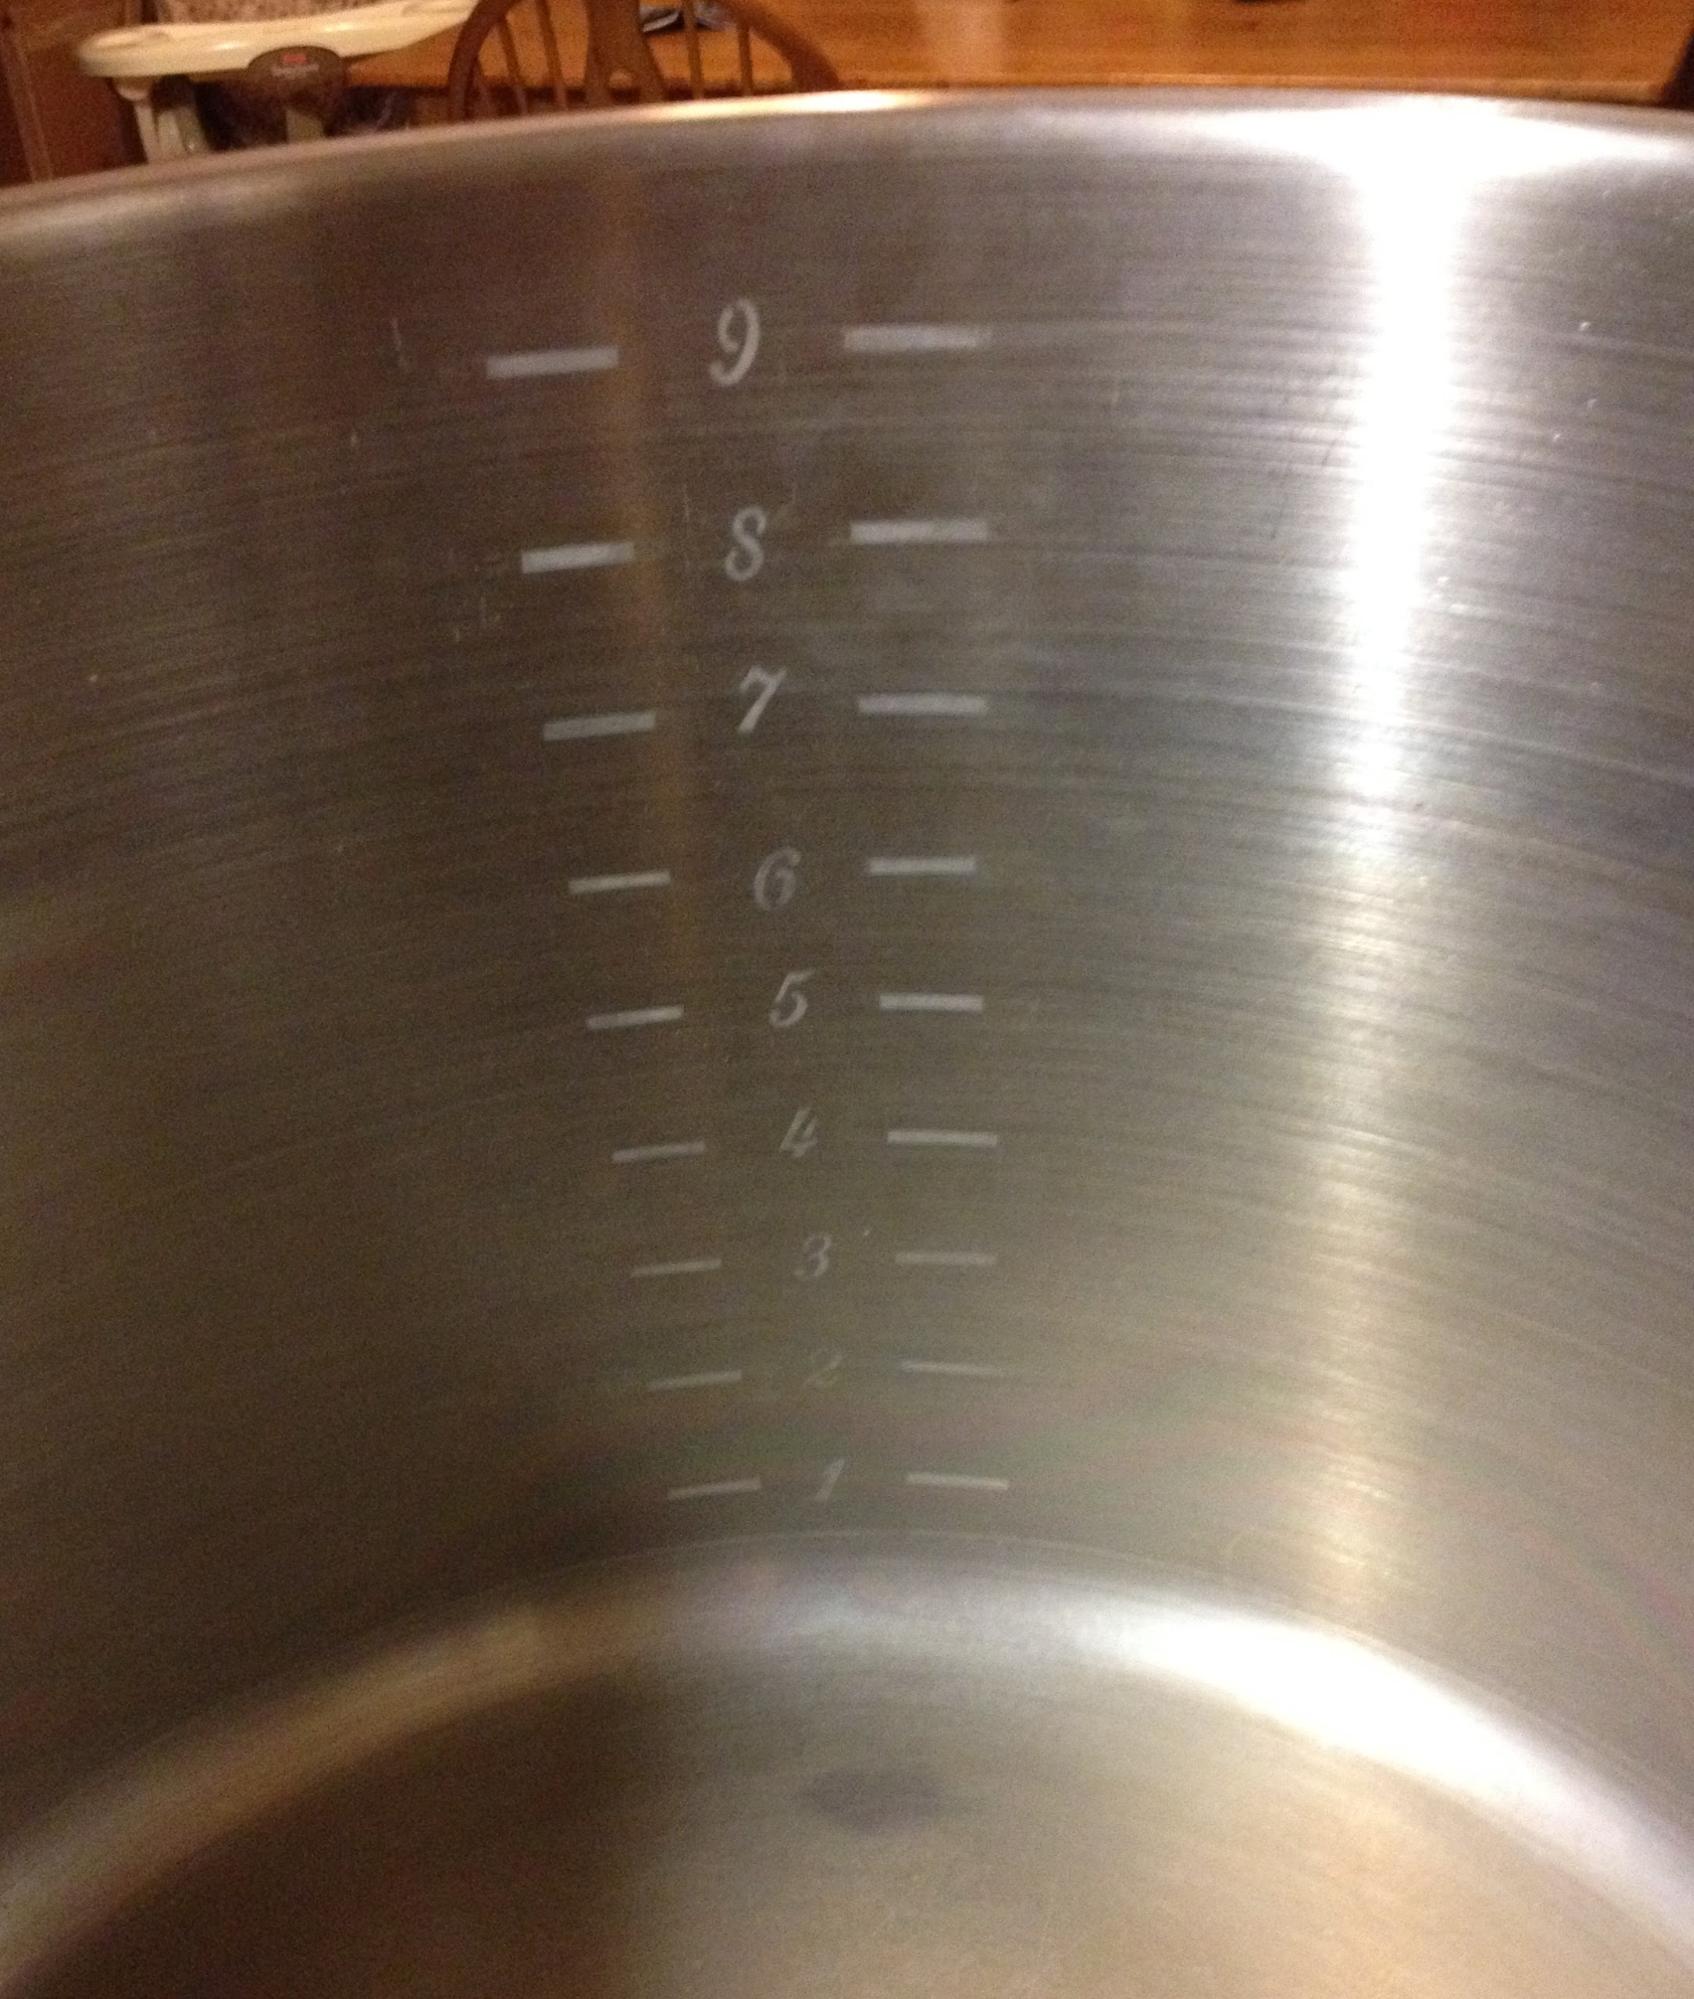 Etching Permanent Volume Markings on a Kettle